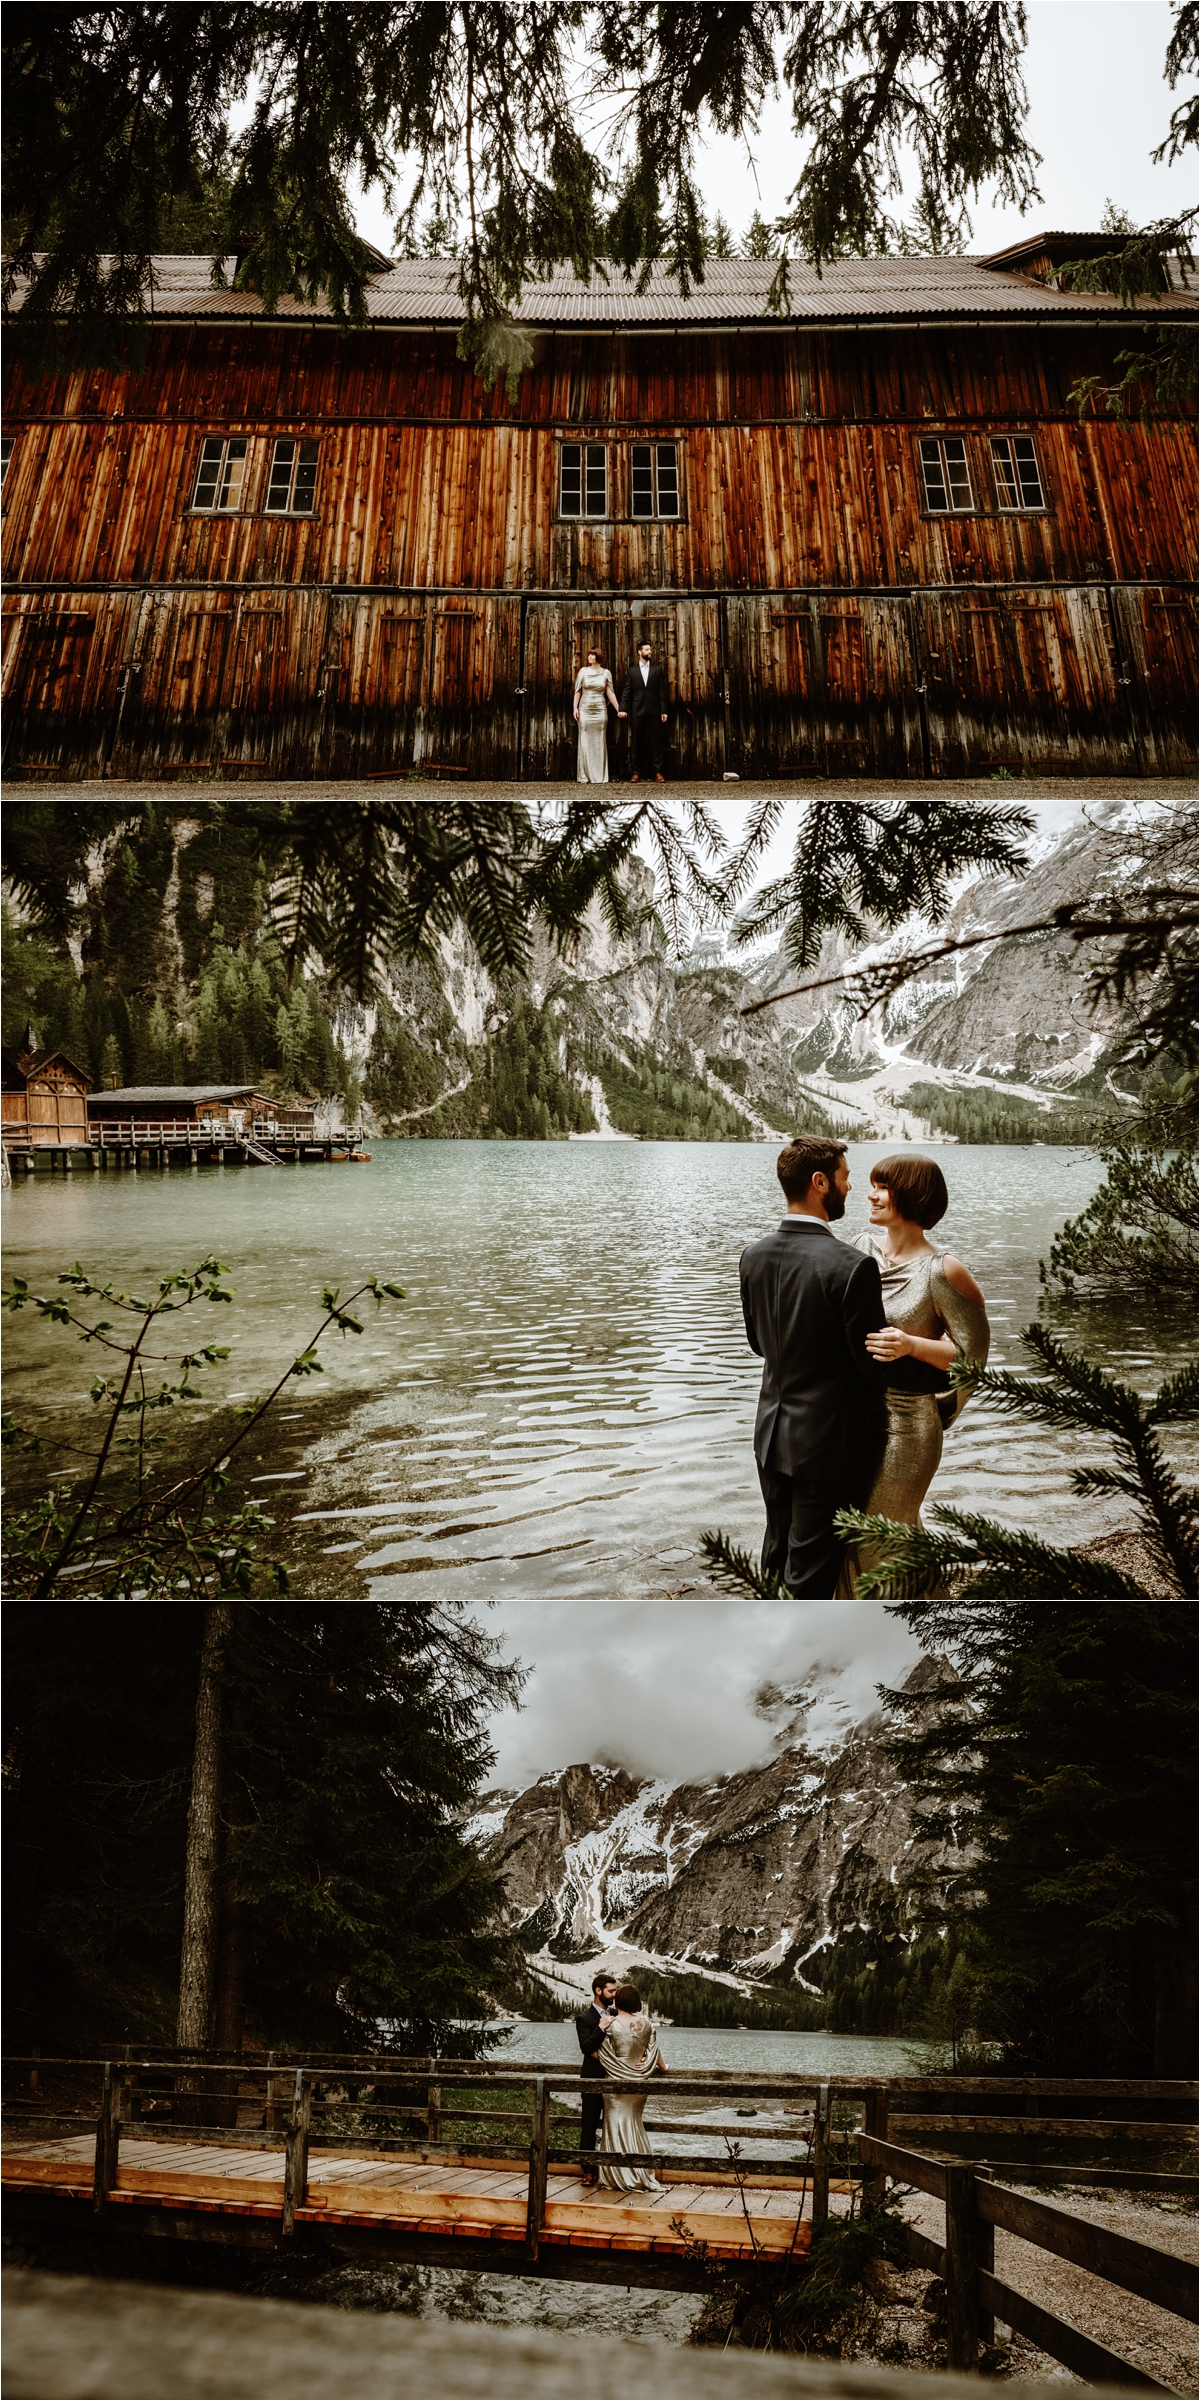 Laurel & Dustin shelter from the rain under the trees and barn roof at Lake Braies in the Italian Alps. Photo by Wild Connections Photography